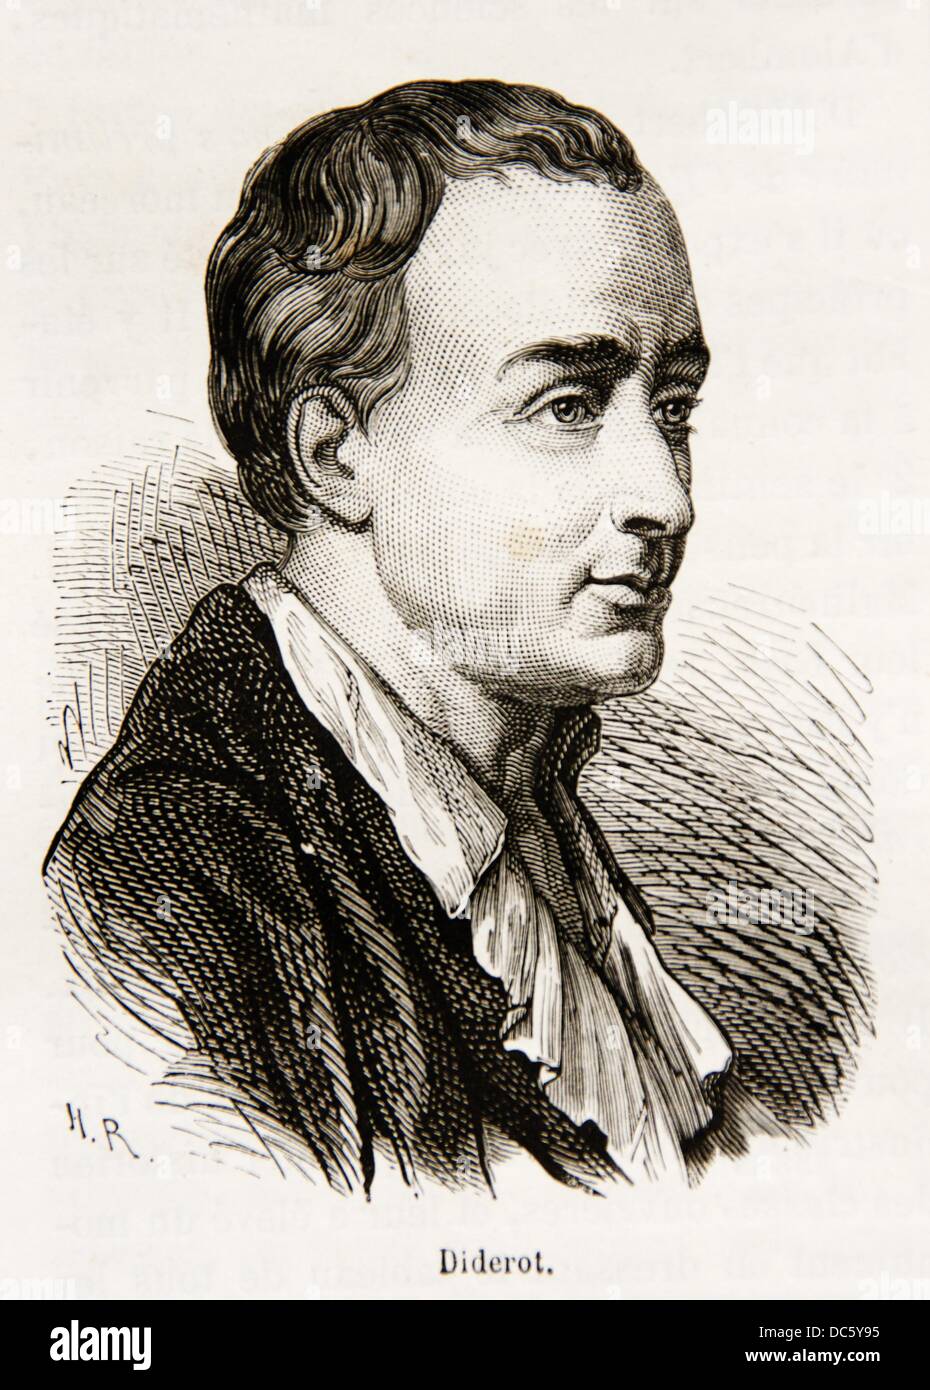 Denis Diderot (October 5, 1713 - July 31, 1784) was a French philosopher, art critic, and writer. He was a prominent figure Stock Photo